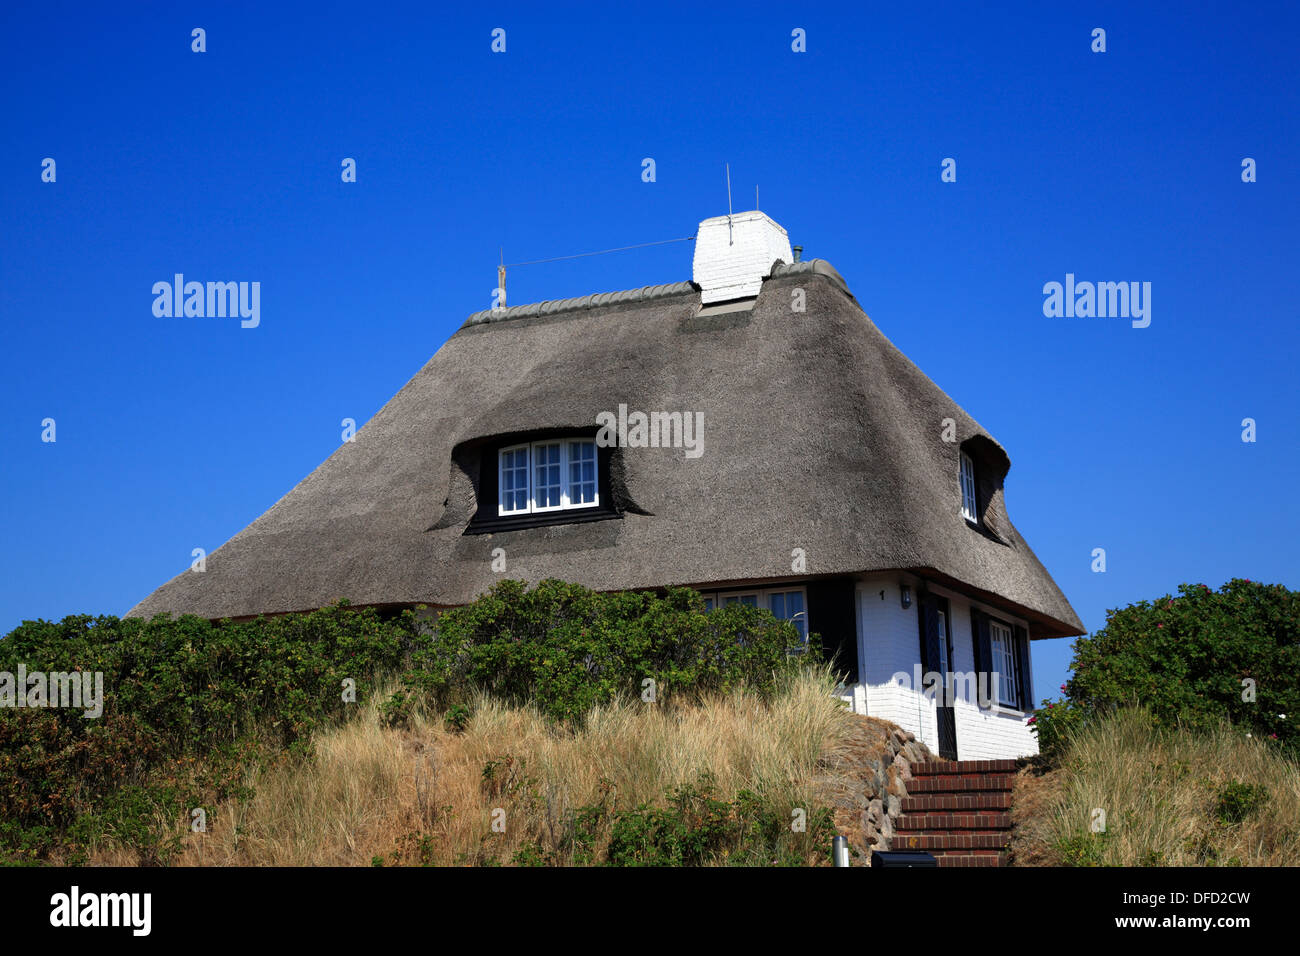 Thatched Holliday-House in Rantum, Sylt island, Schleswig-Holstein, Germany Stock Photo